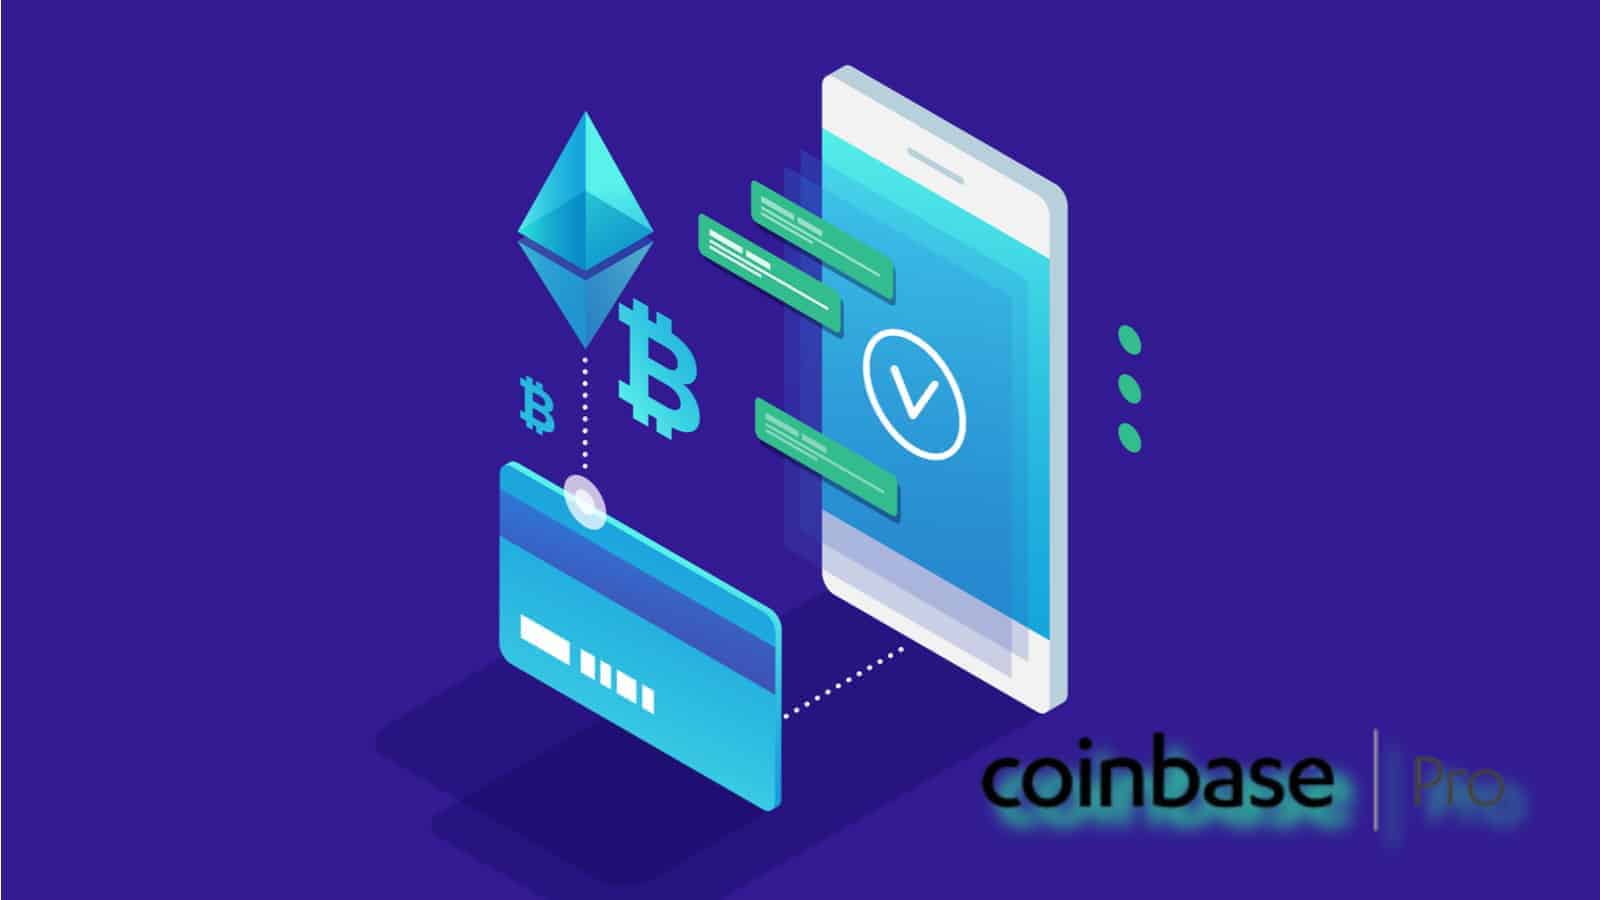 ZRX Now Listed on Coinbase Pro Cryptocurrency Exchange